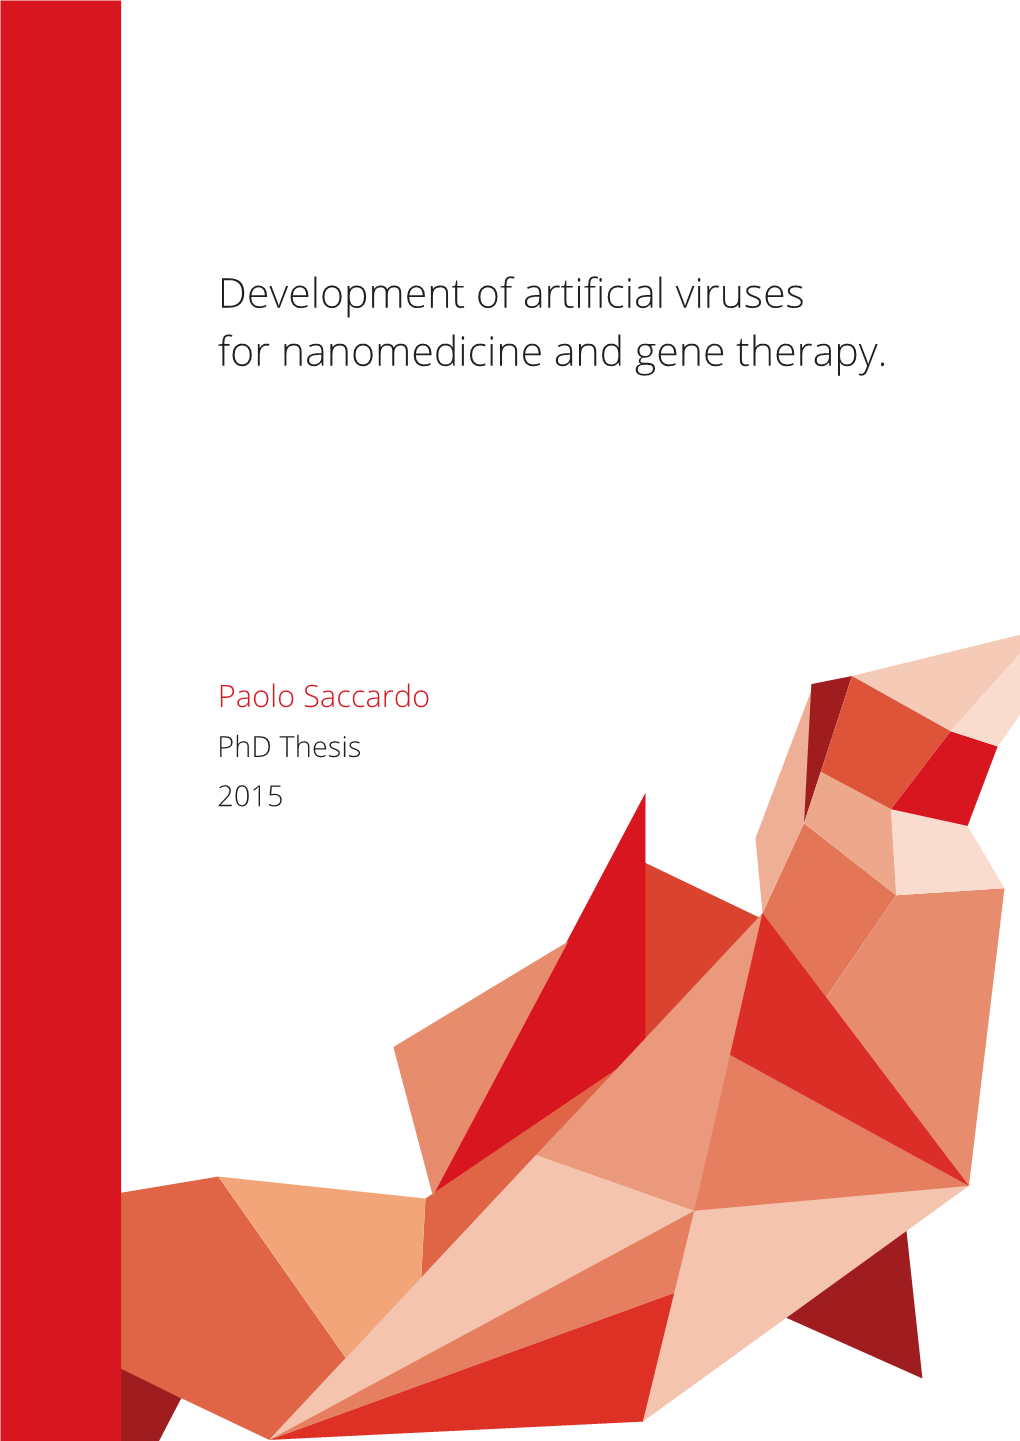 Viruses for Nanomedicine and Gene Therapy